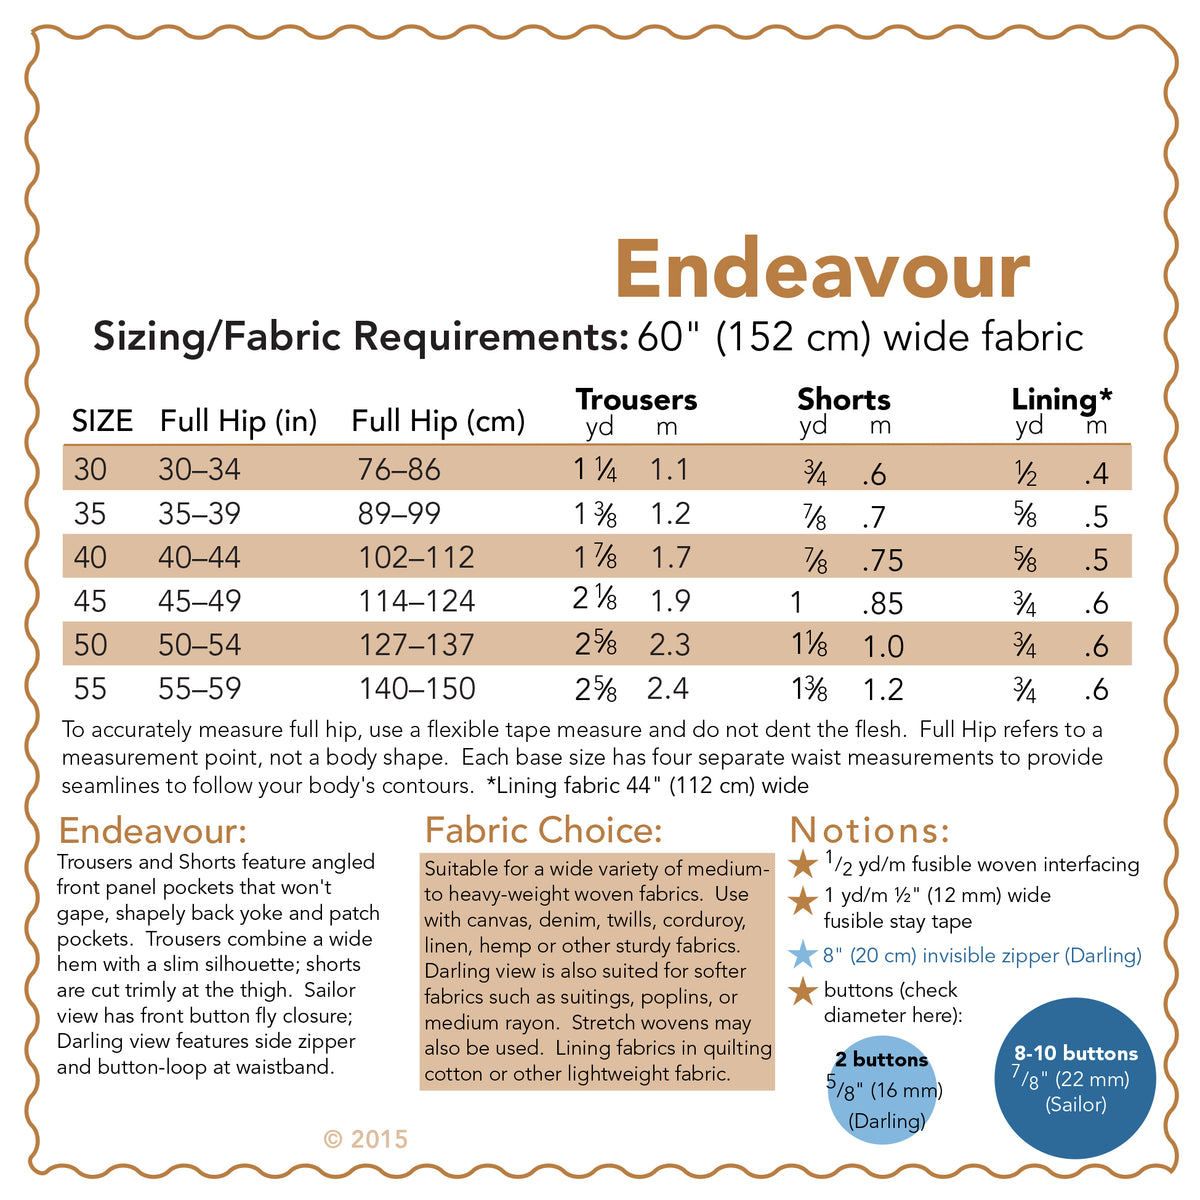 SEWING CAKE 5556 - ENDEAVOUR TROUSERS AND SHORTS (PDF)